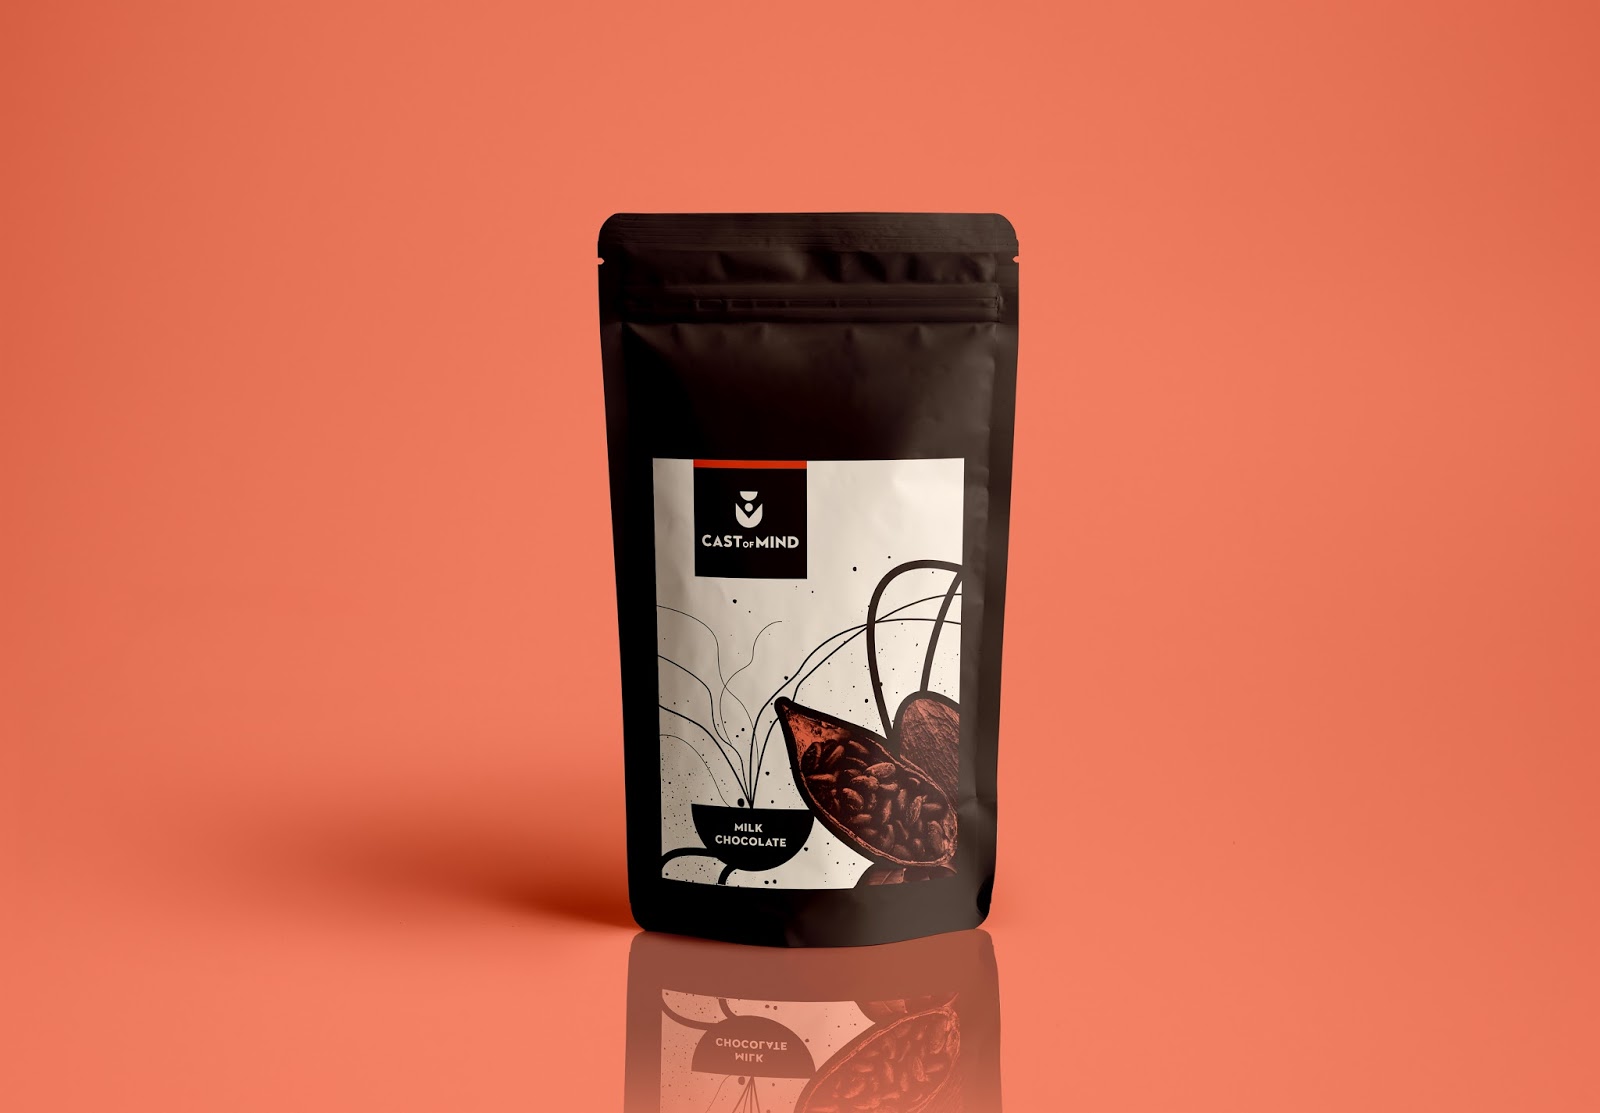 Packaging Design for Coffee & Chocolate Range from Greece